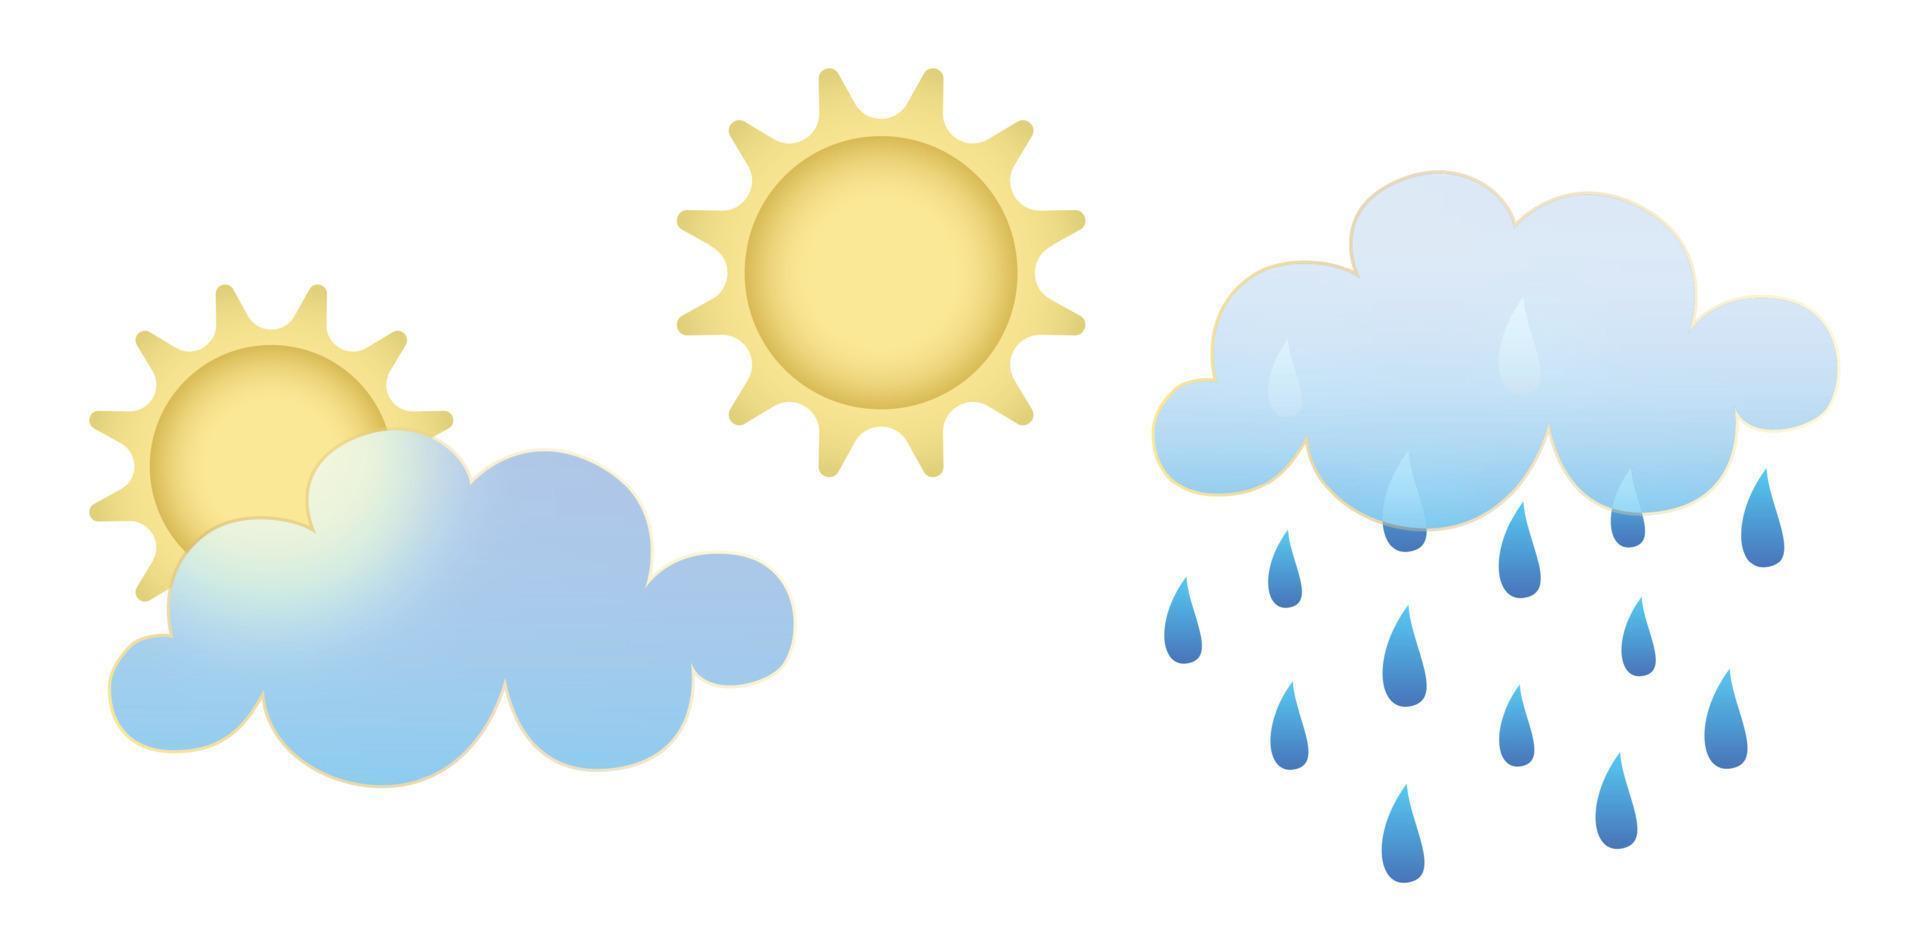 Set of weather icons. Glassmorphism style symbols for meteo forecast app Elements Isolated on white background. Day and night summer spring autumn season sings. Sun, rain, clouds Vector illustrations